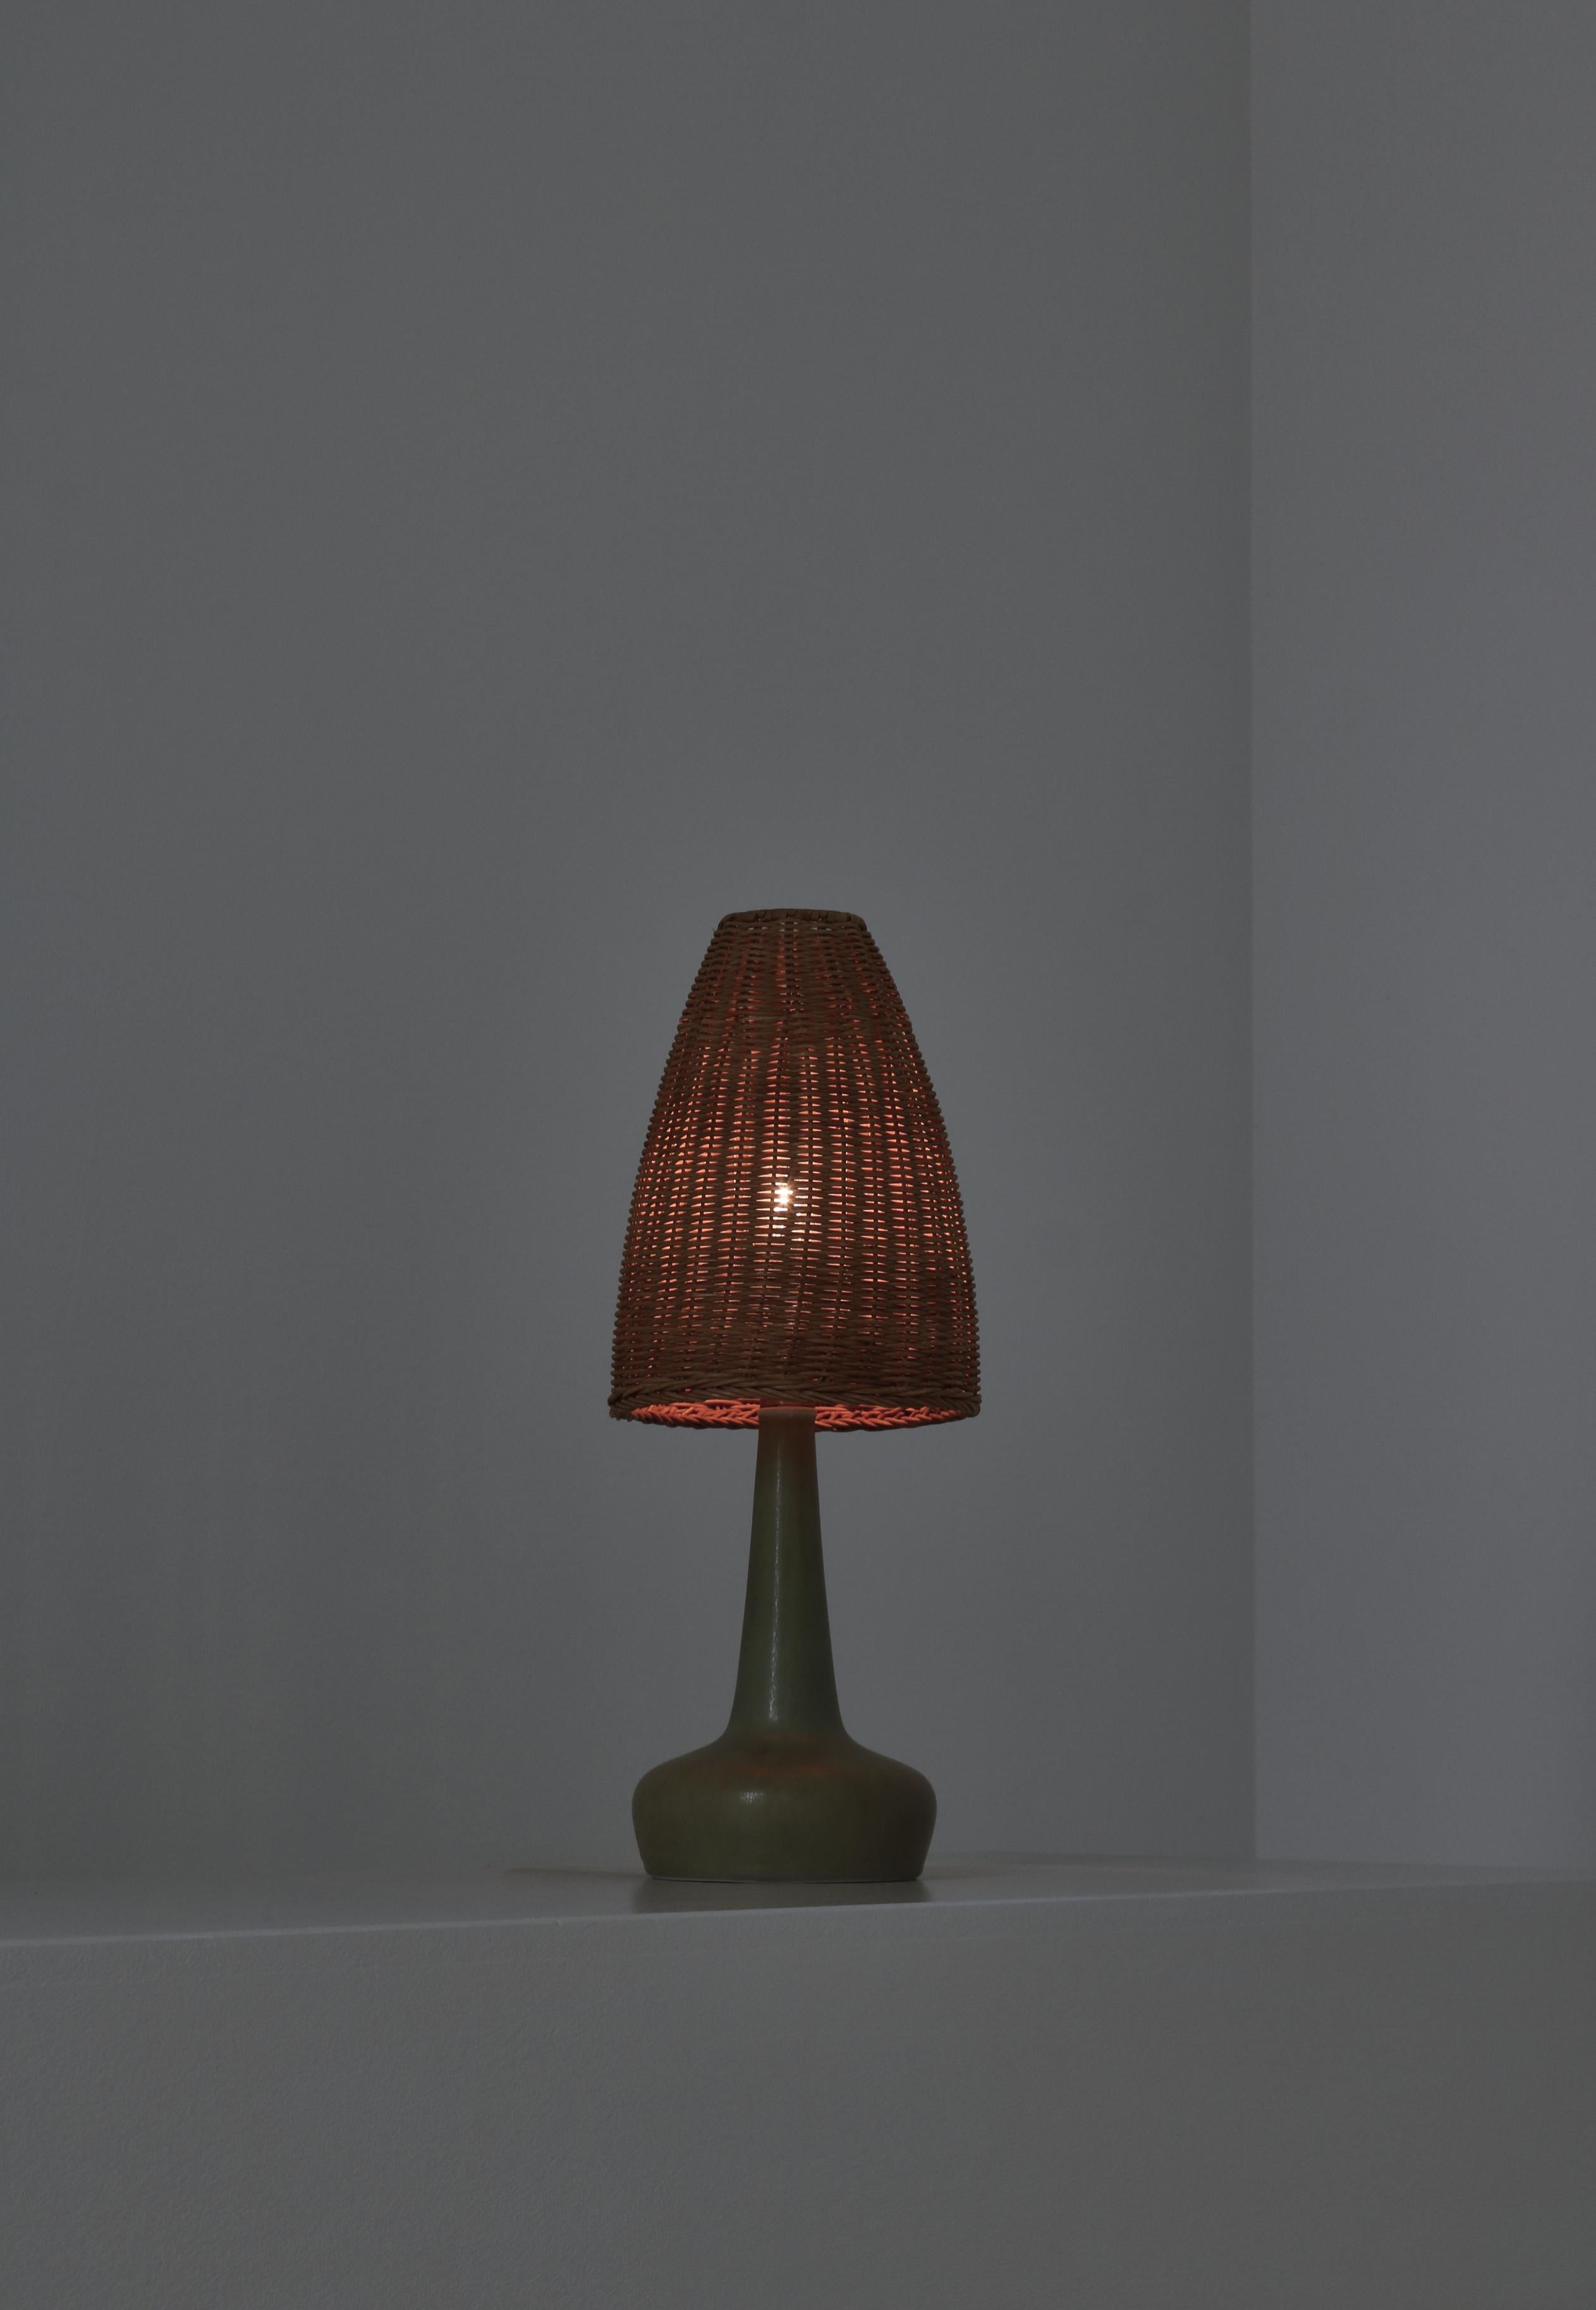 Palshus Stoneware Table Lamp Wicker Shade, Denmark by Esben Klint, 1970s In Good Condition For Sale In Odense, DK